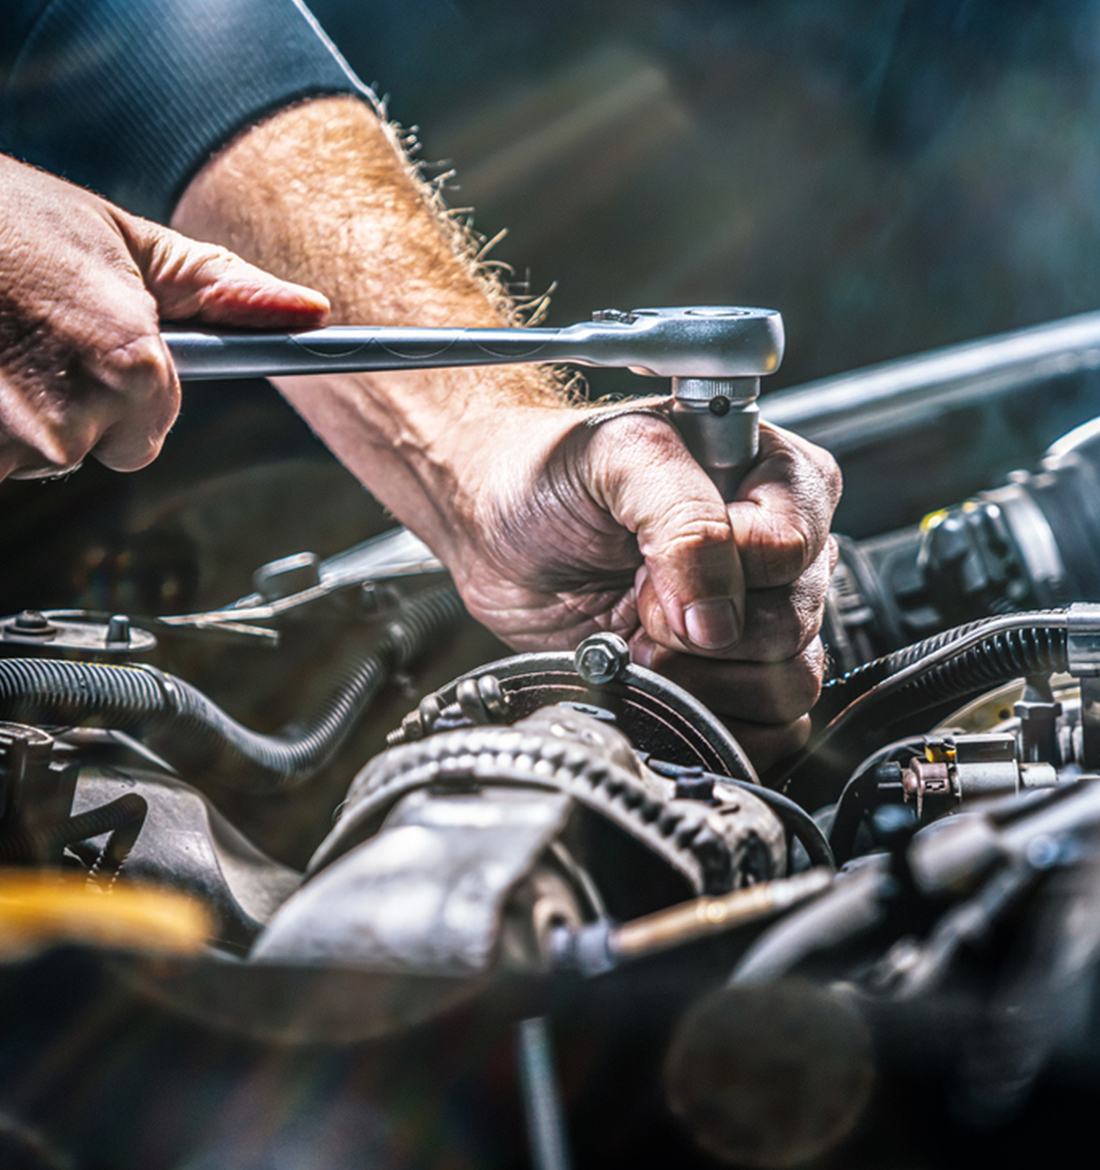 Differential Repair in Bellville, Differential Shop Near Me